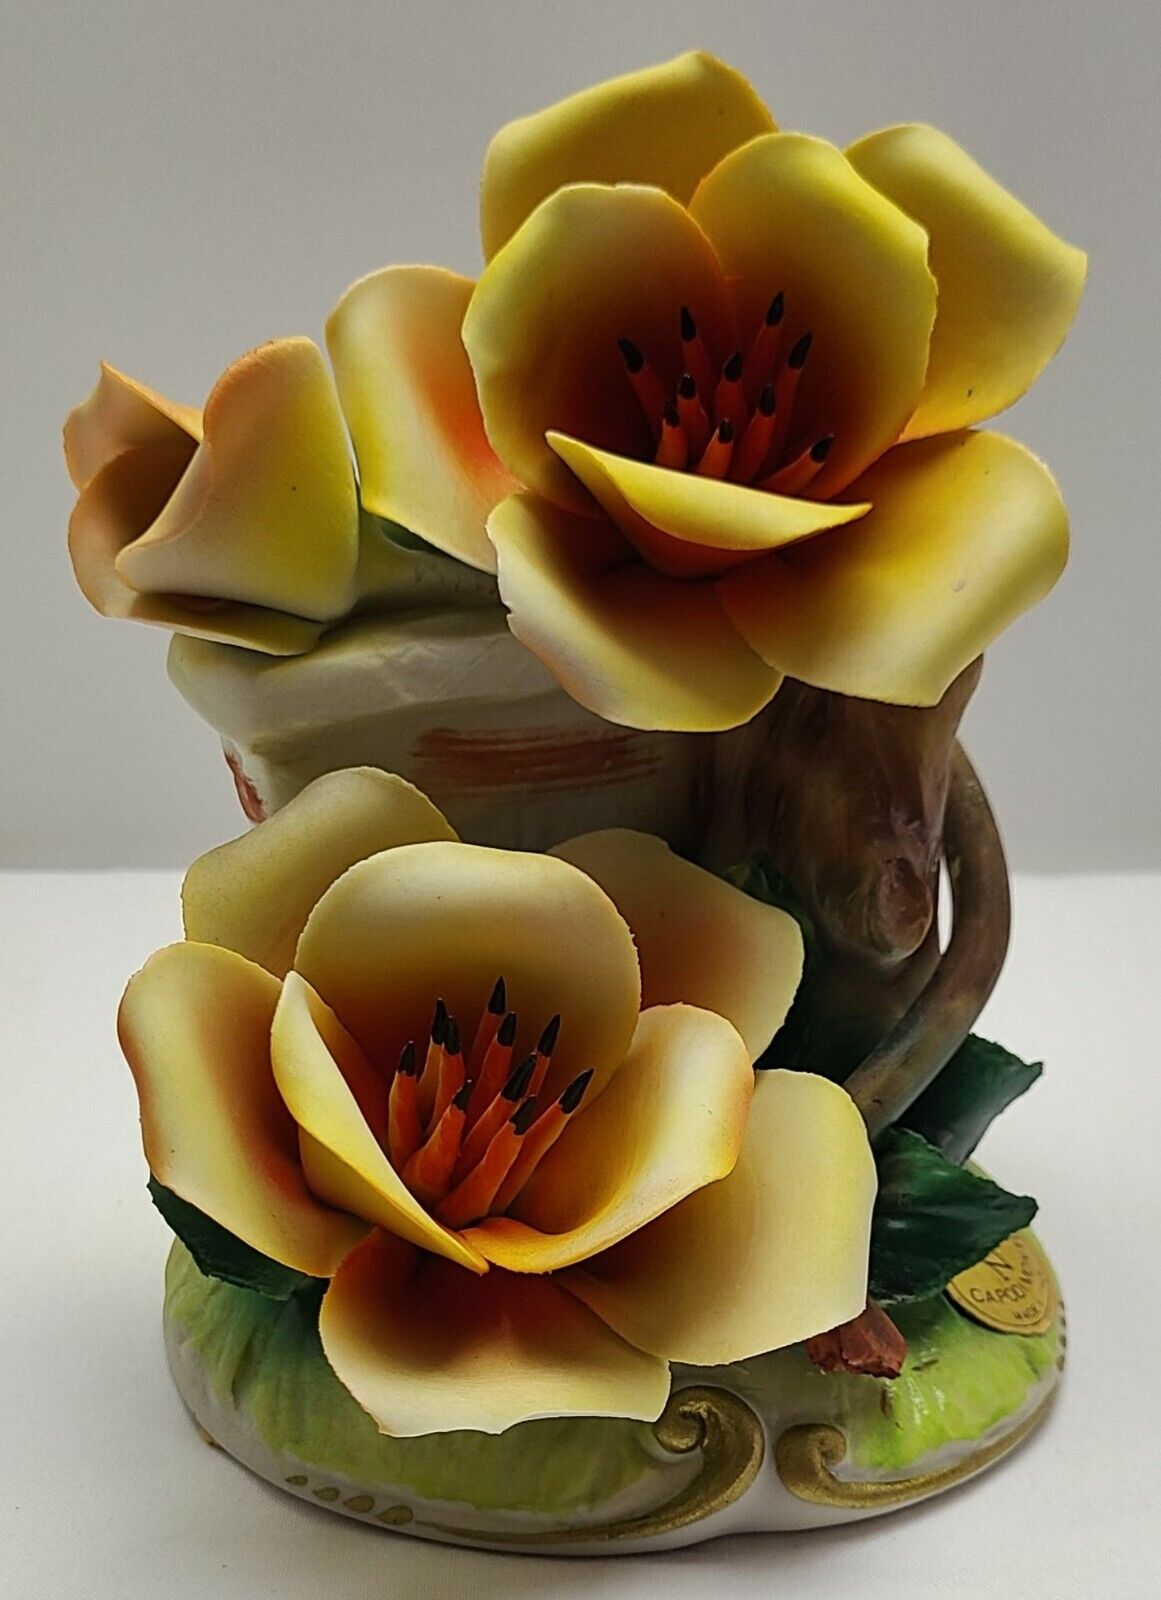  Vintage Capodimonte Yellow Roses & Buds  Made in Italy Porcelain 